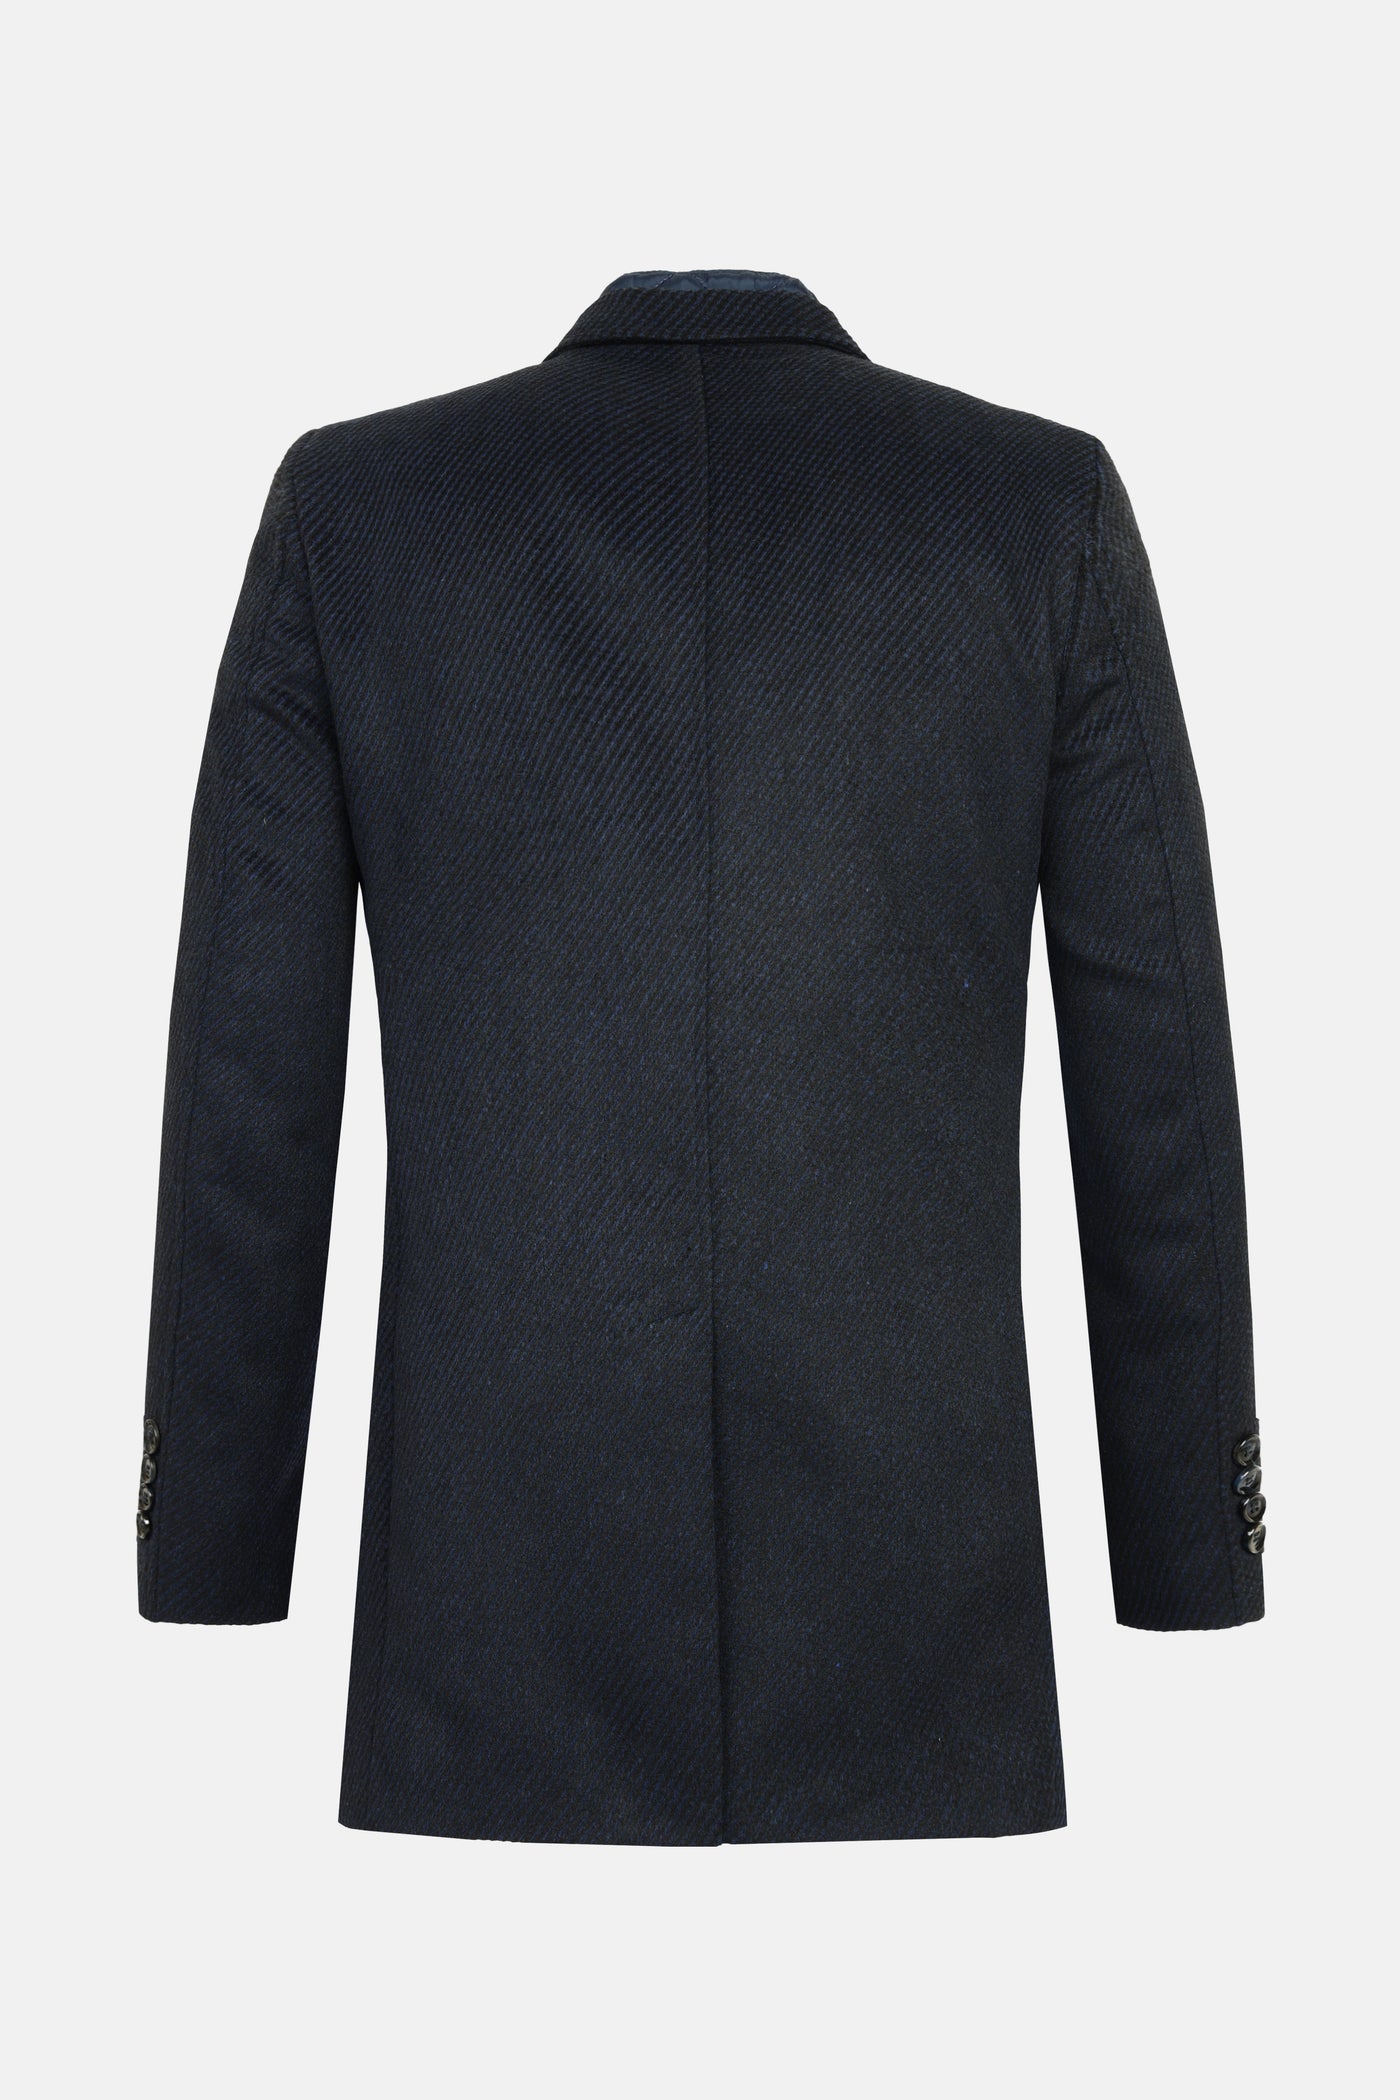 Jacquard Black & Navy Woven wide lapel Coat with removable padded piece